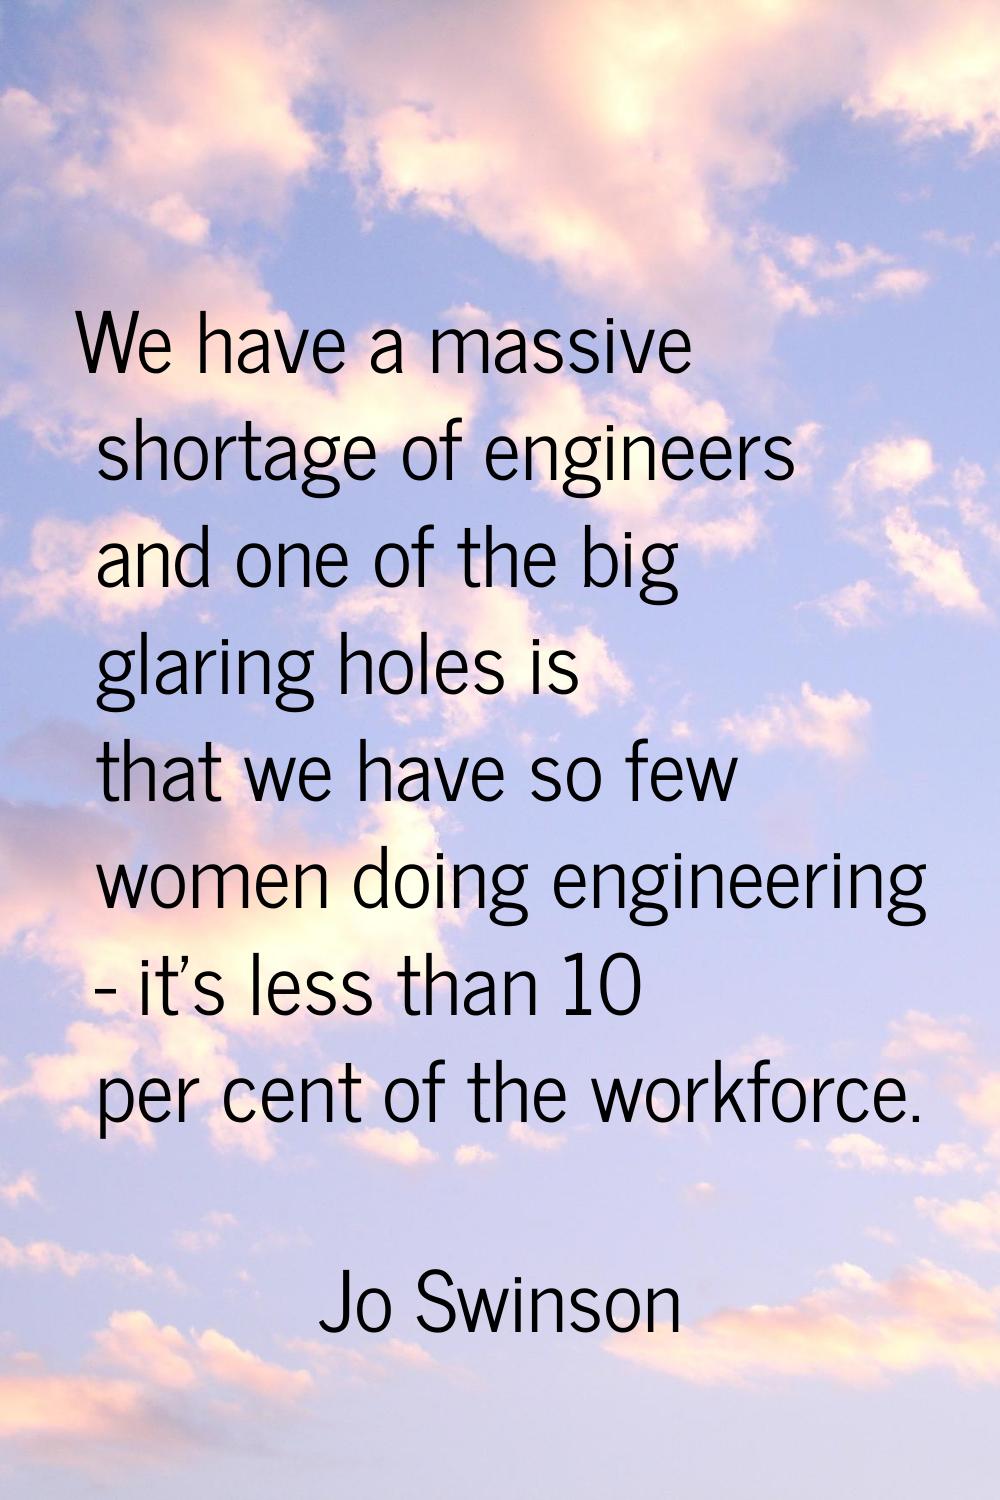 We have a massive shortage of engineers and one of the big glaring holes is that we have so few wom